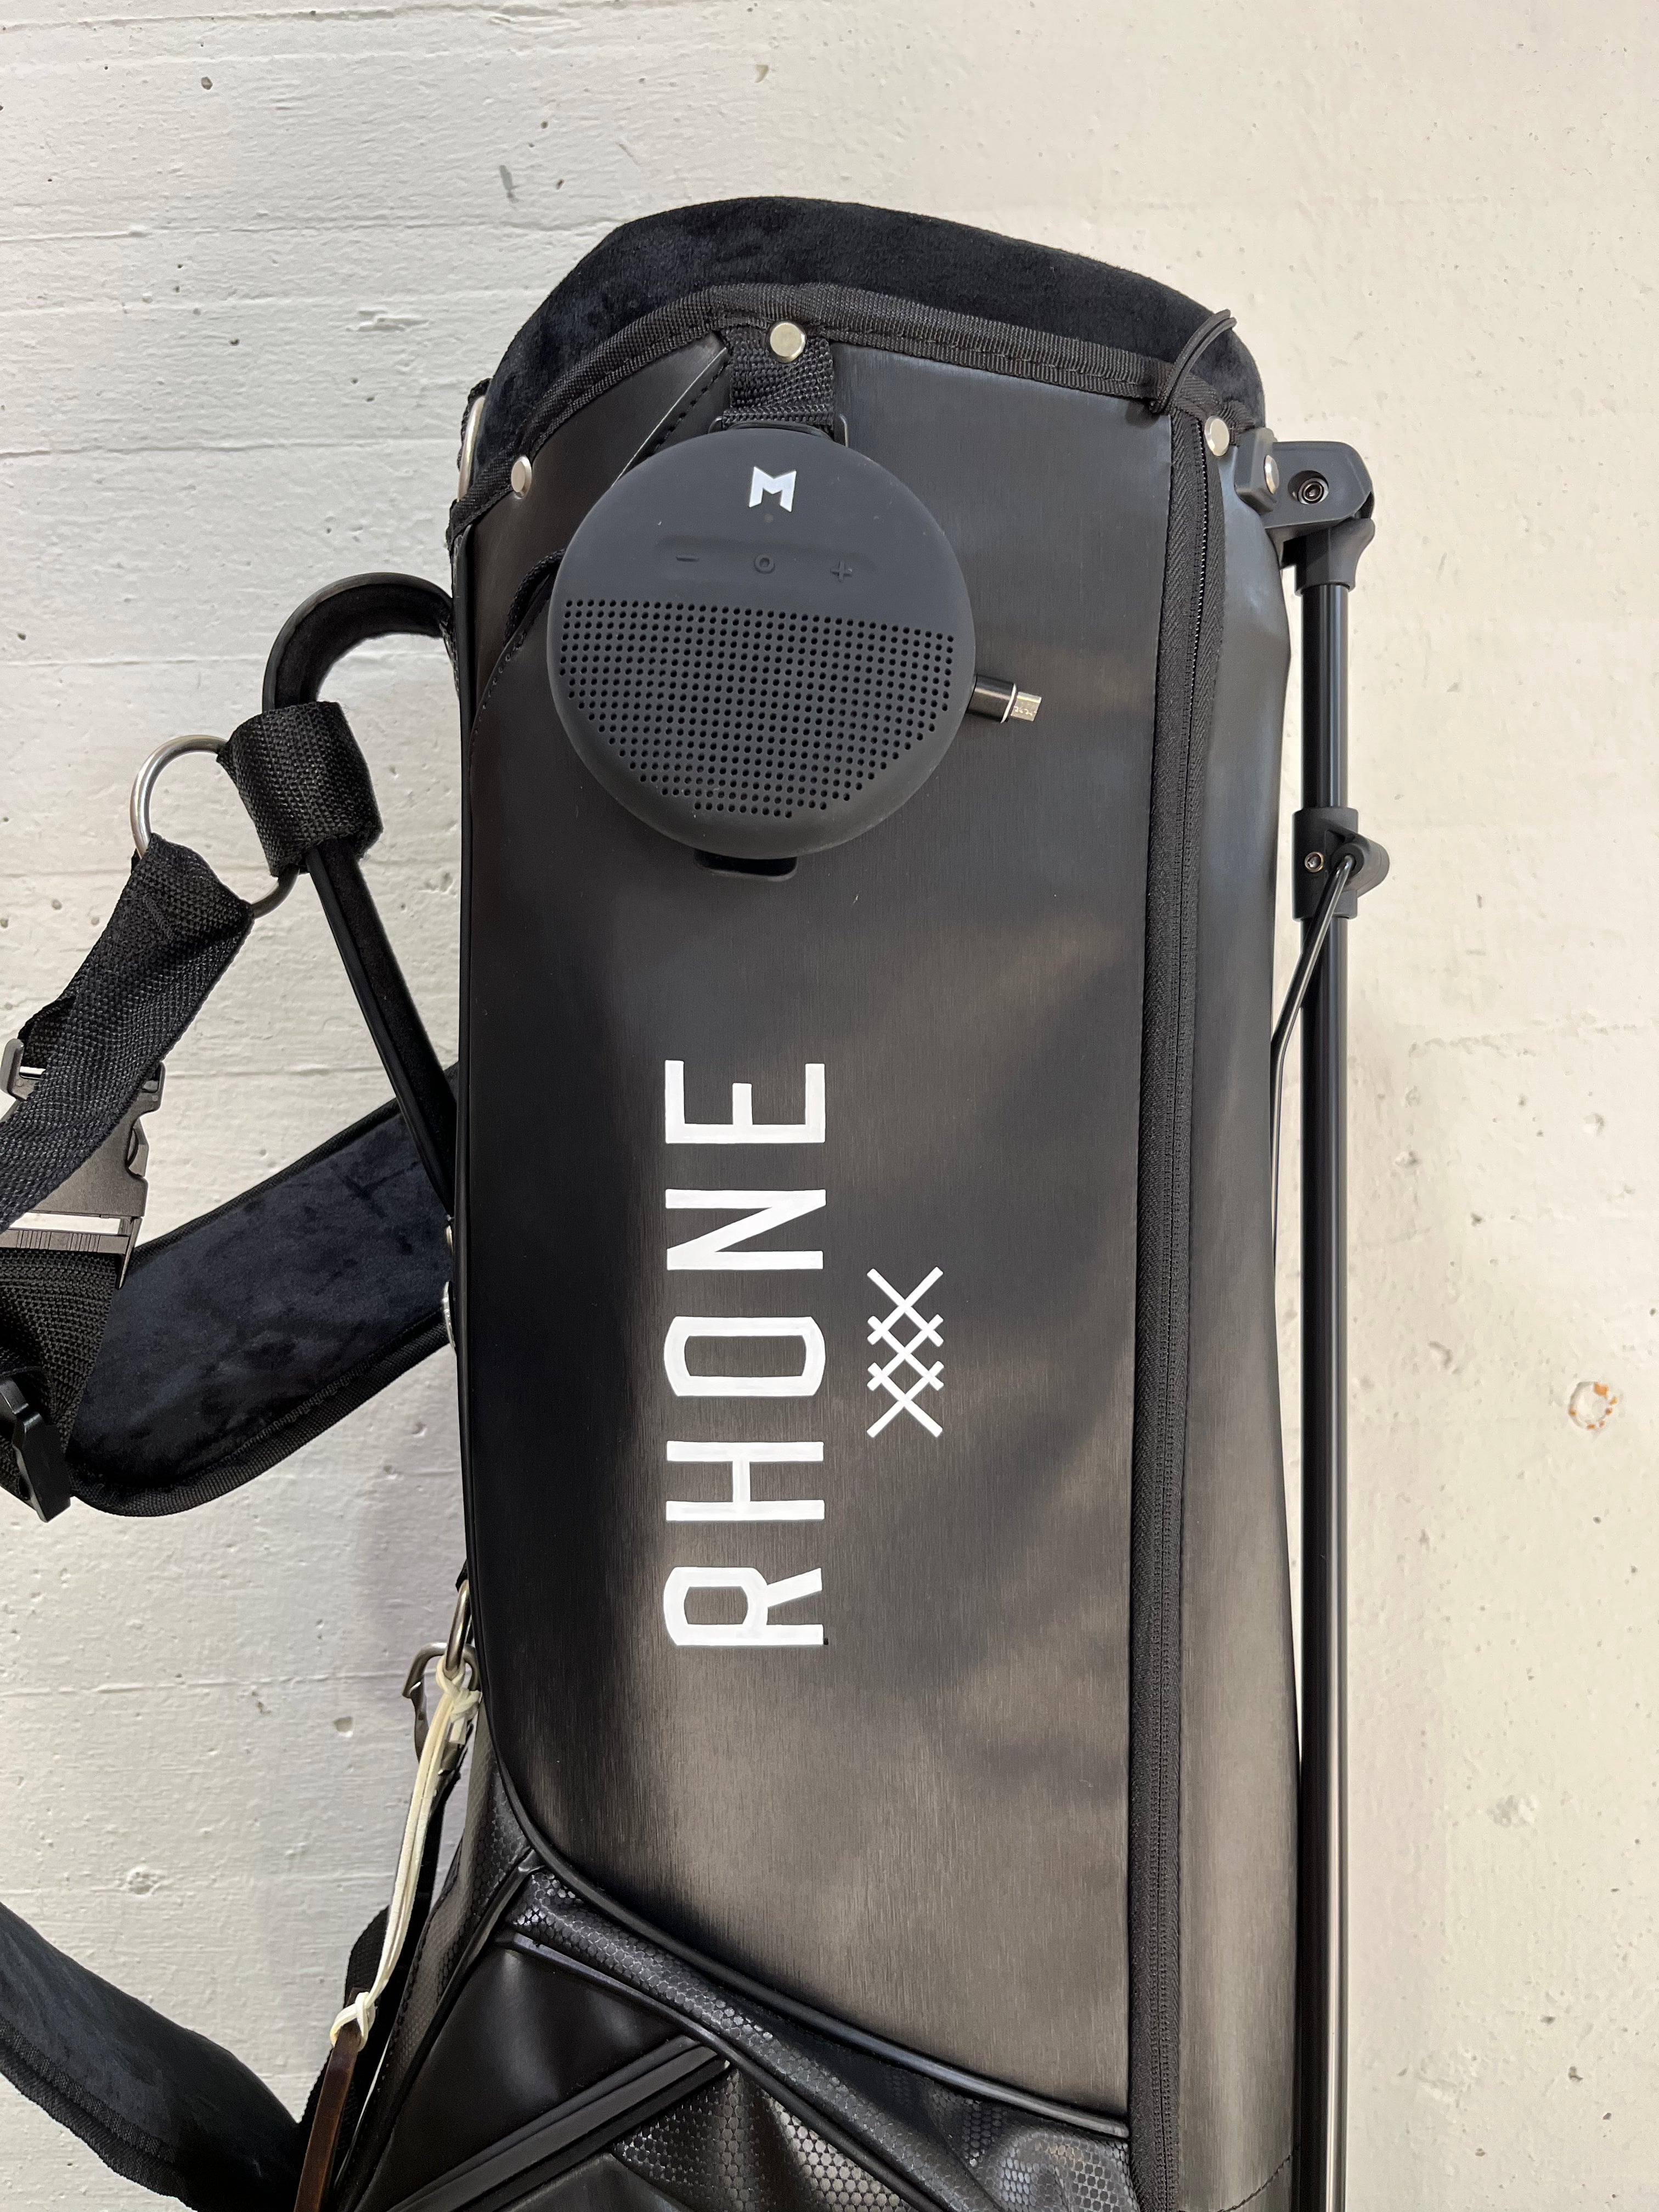 MNML GOLF and Rhone company logo painted in white, on a black golf bag.